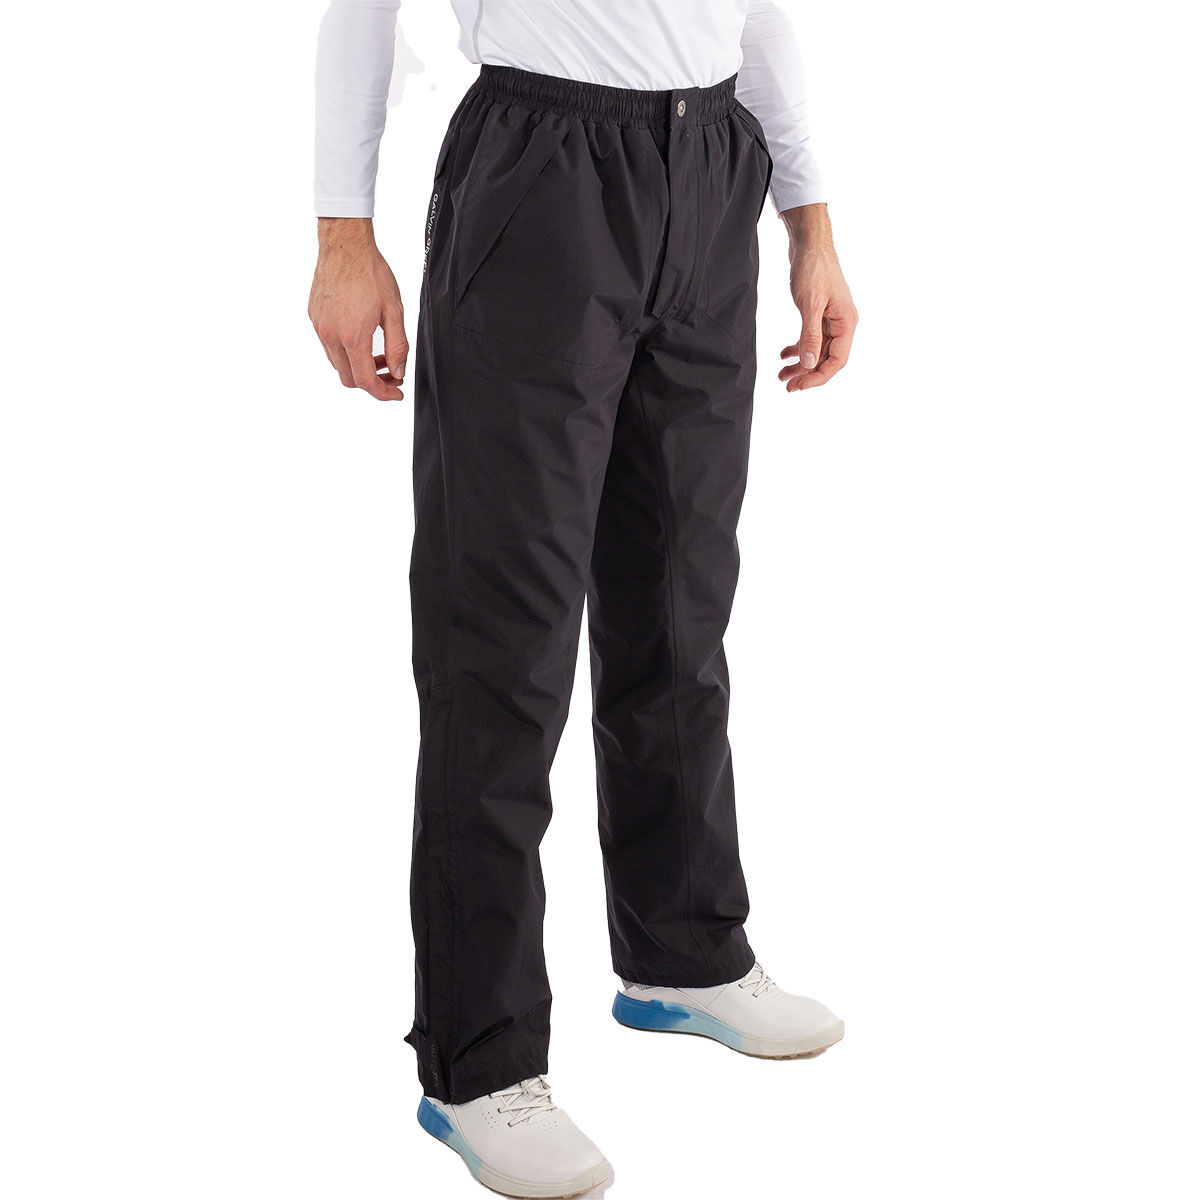 Galvin Green Mens Black Lightweight Andy GORE-TEX Waterproof Long Fit Golf Trousers, Size: L | American Golf von Galvin Green